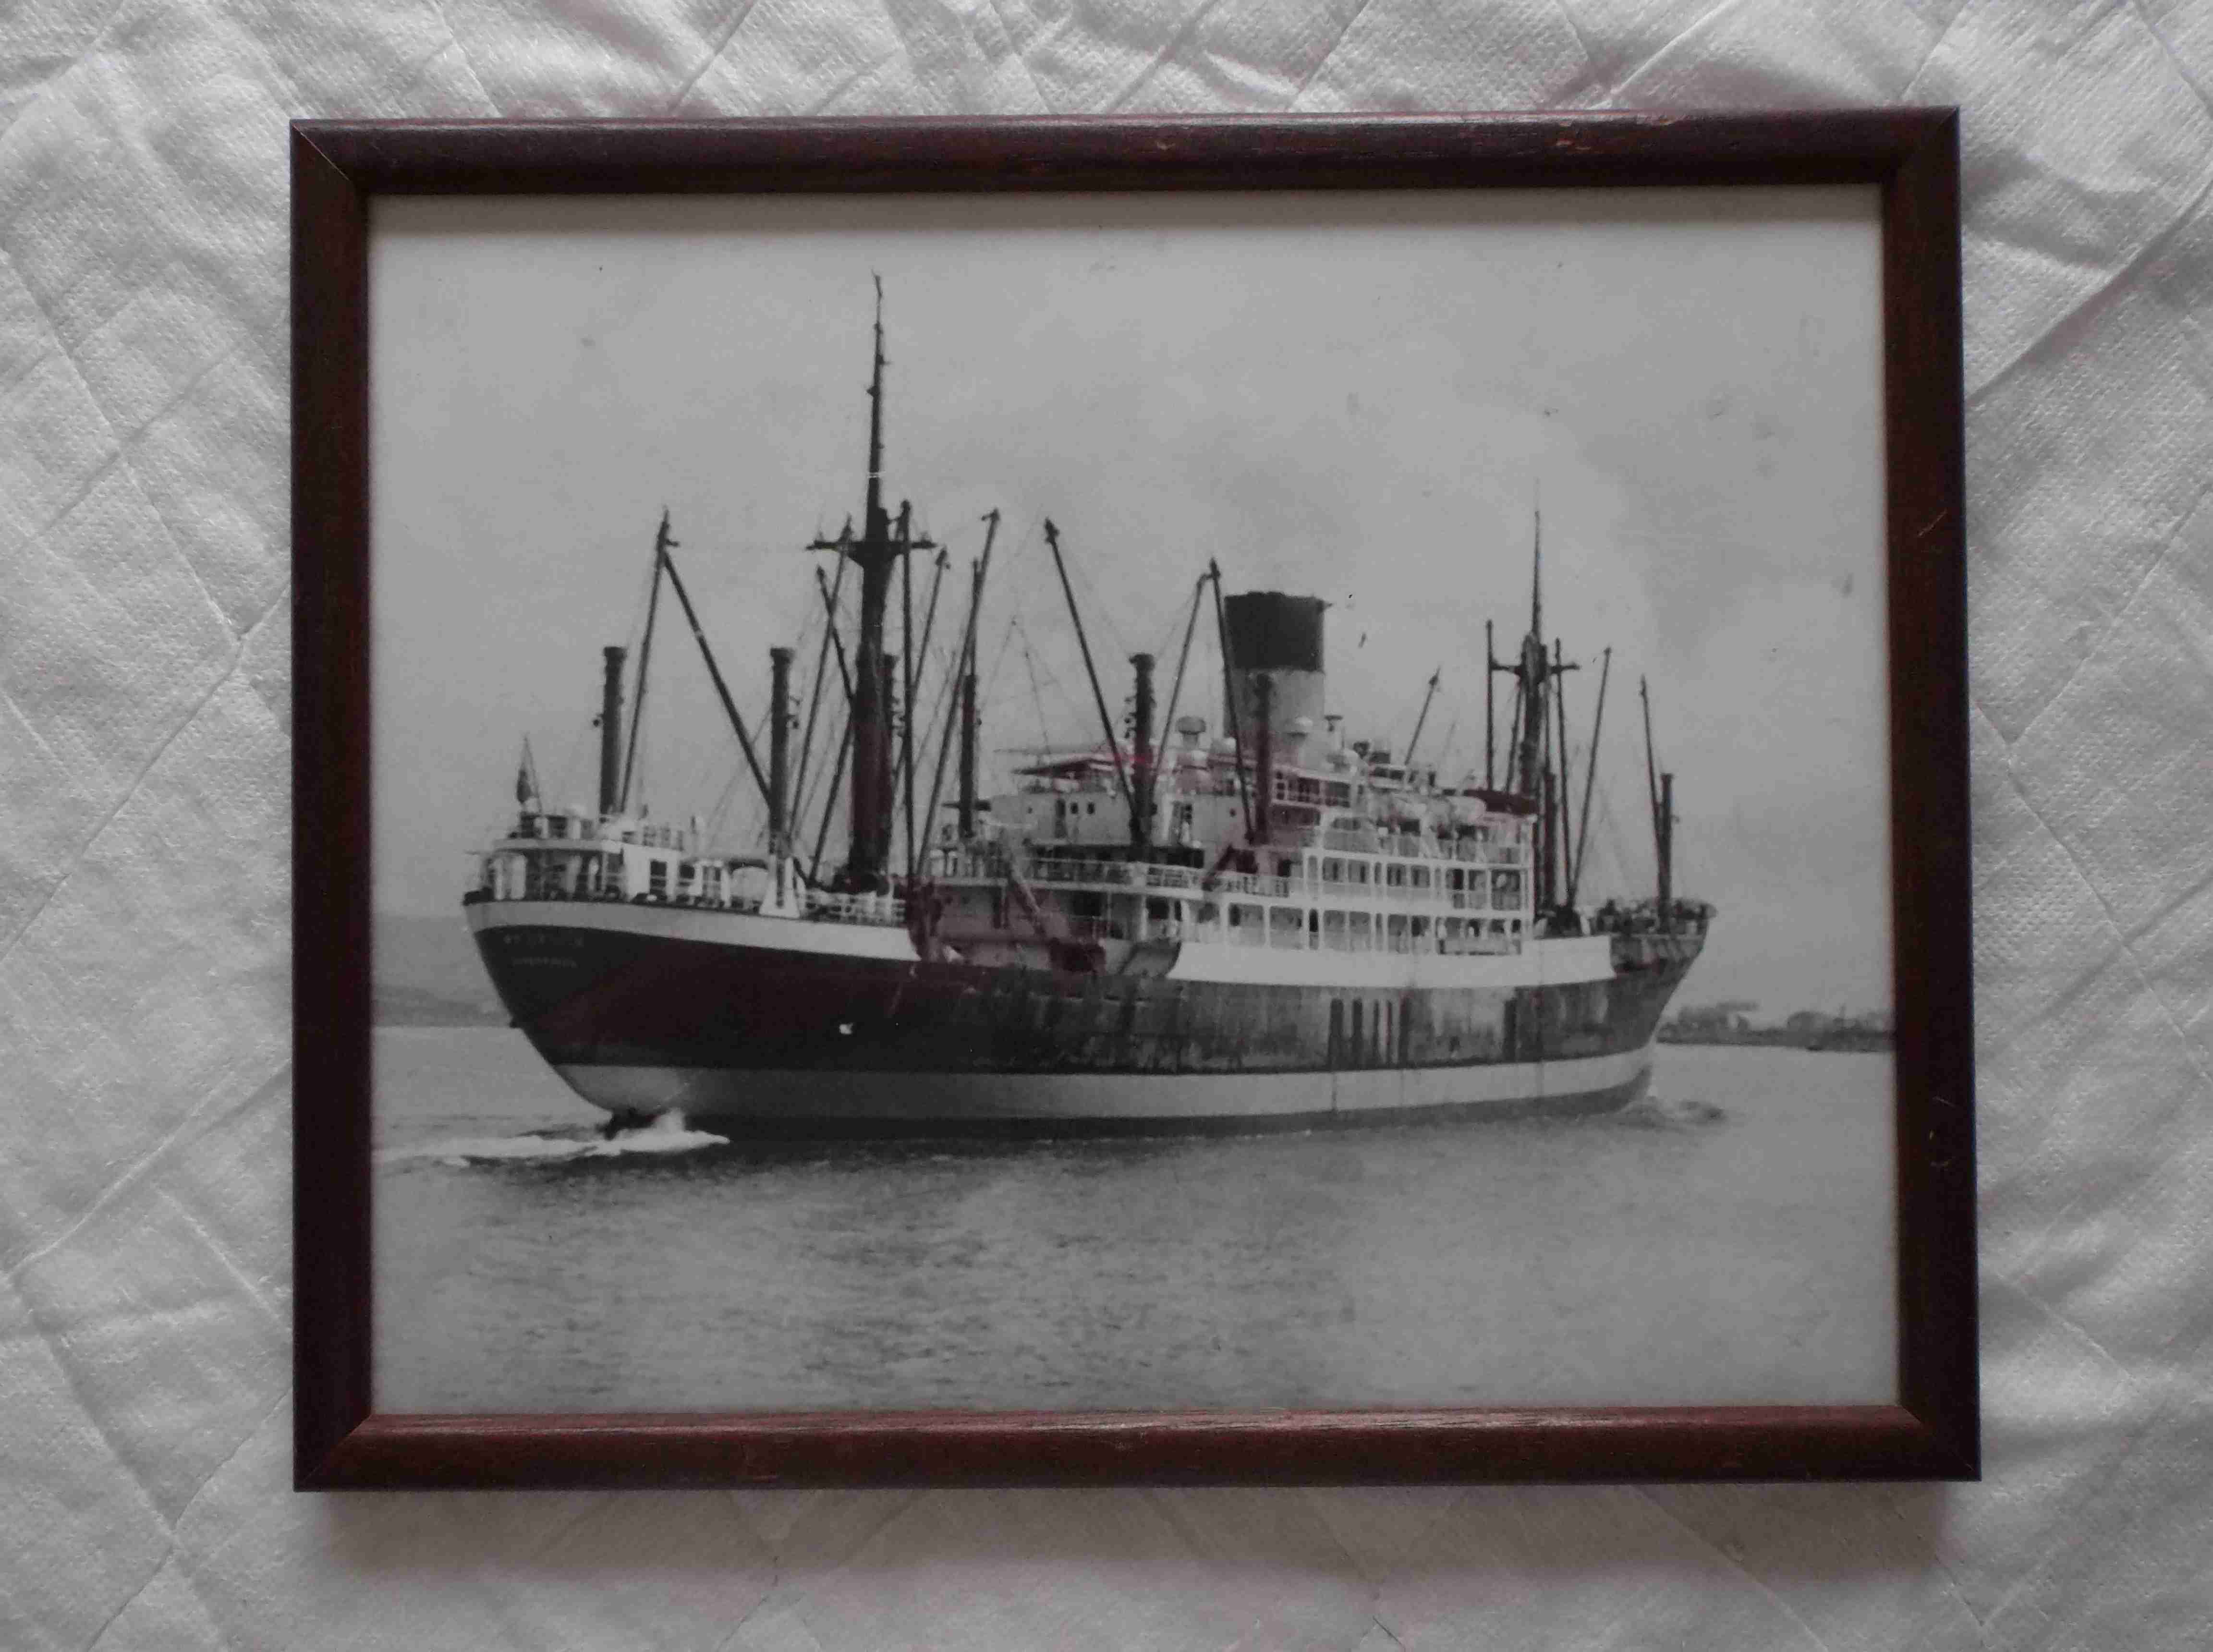 EARLY FRAMED PHOTOGRAPH OF THE BLUE FUNNEL LINE VESSEL THE SS PYRRHUS